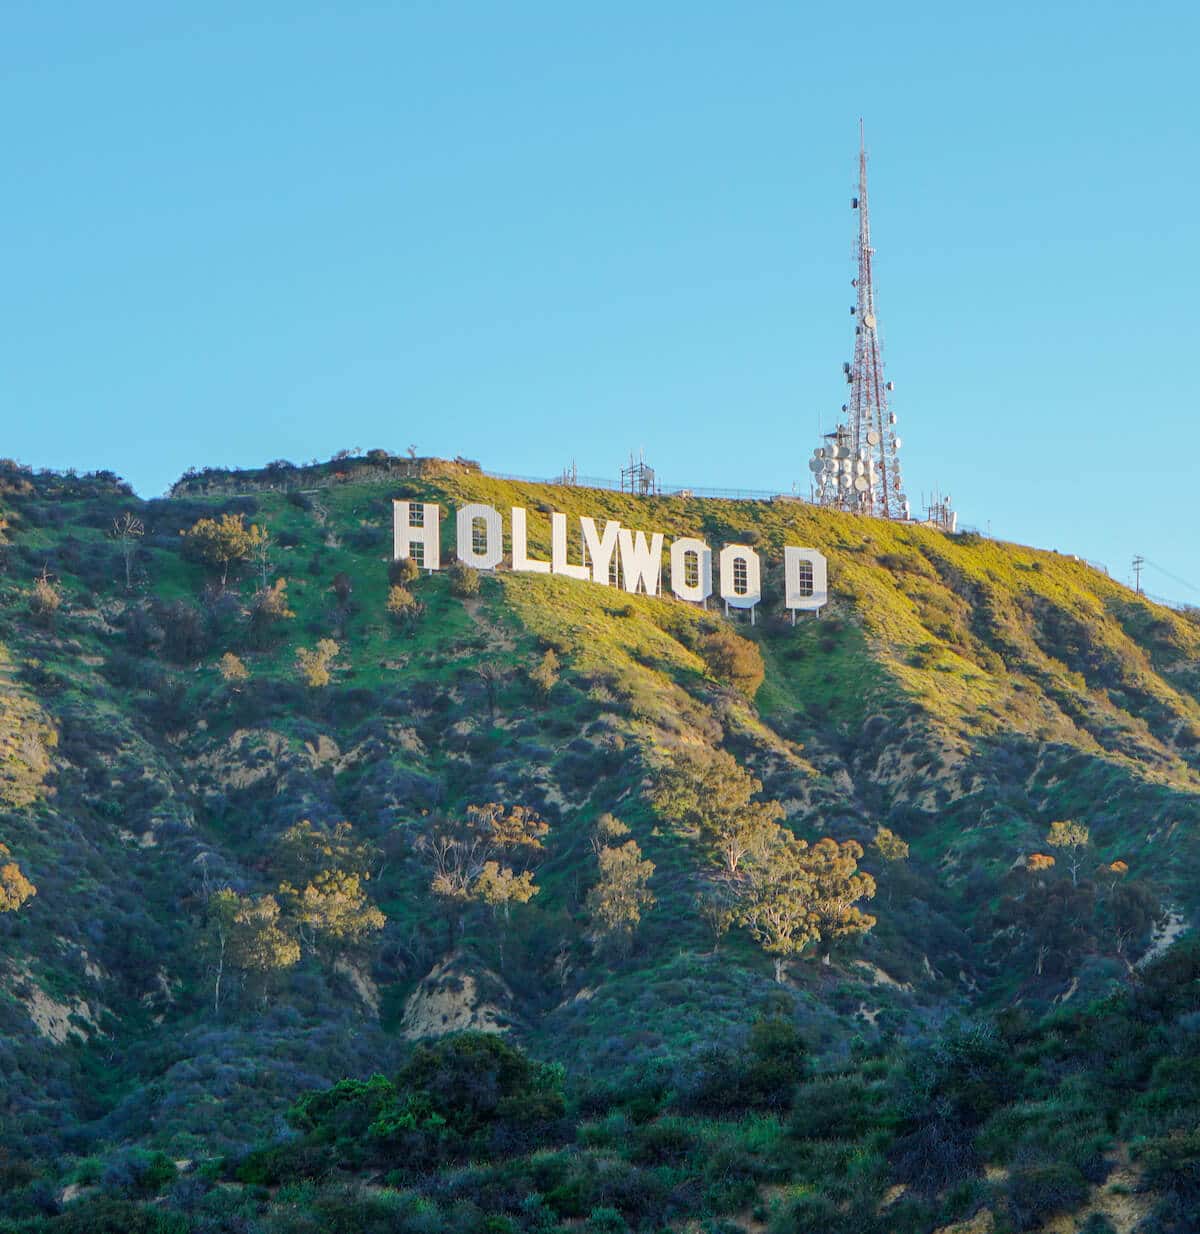 Finding ways to stay motivated in sunny Los Angeles includes going on a hike to the Hollywood sign.